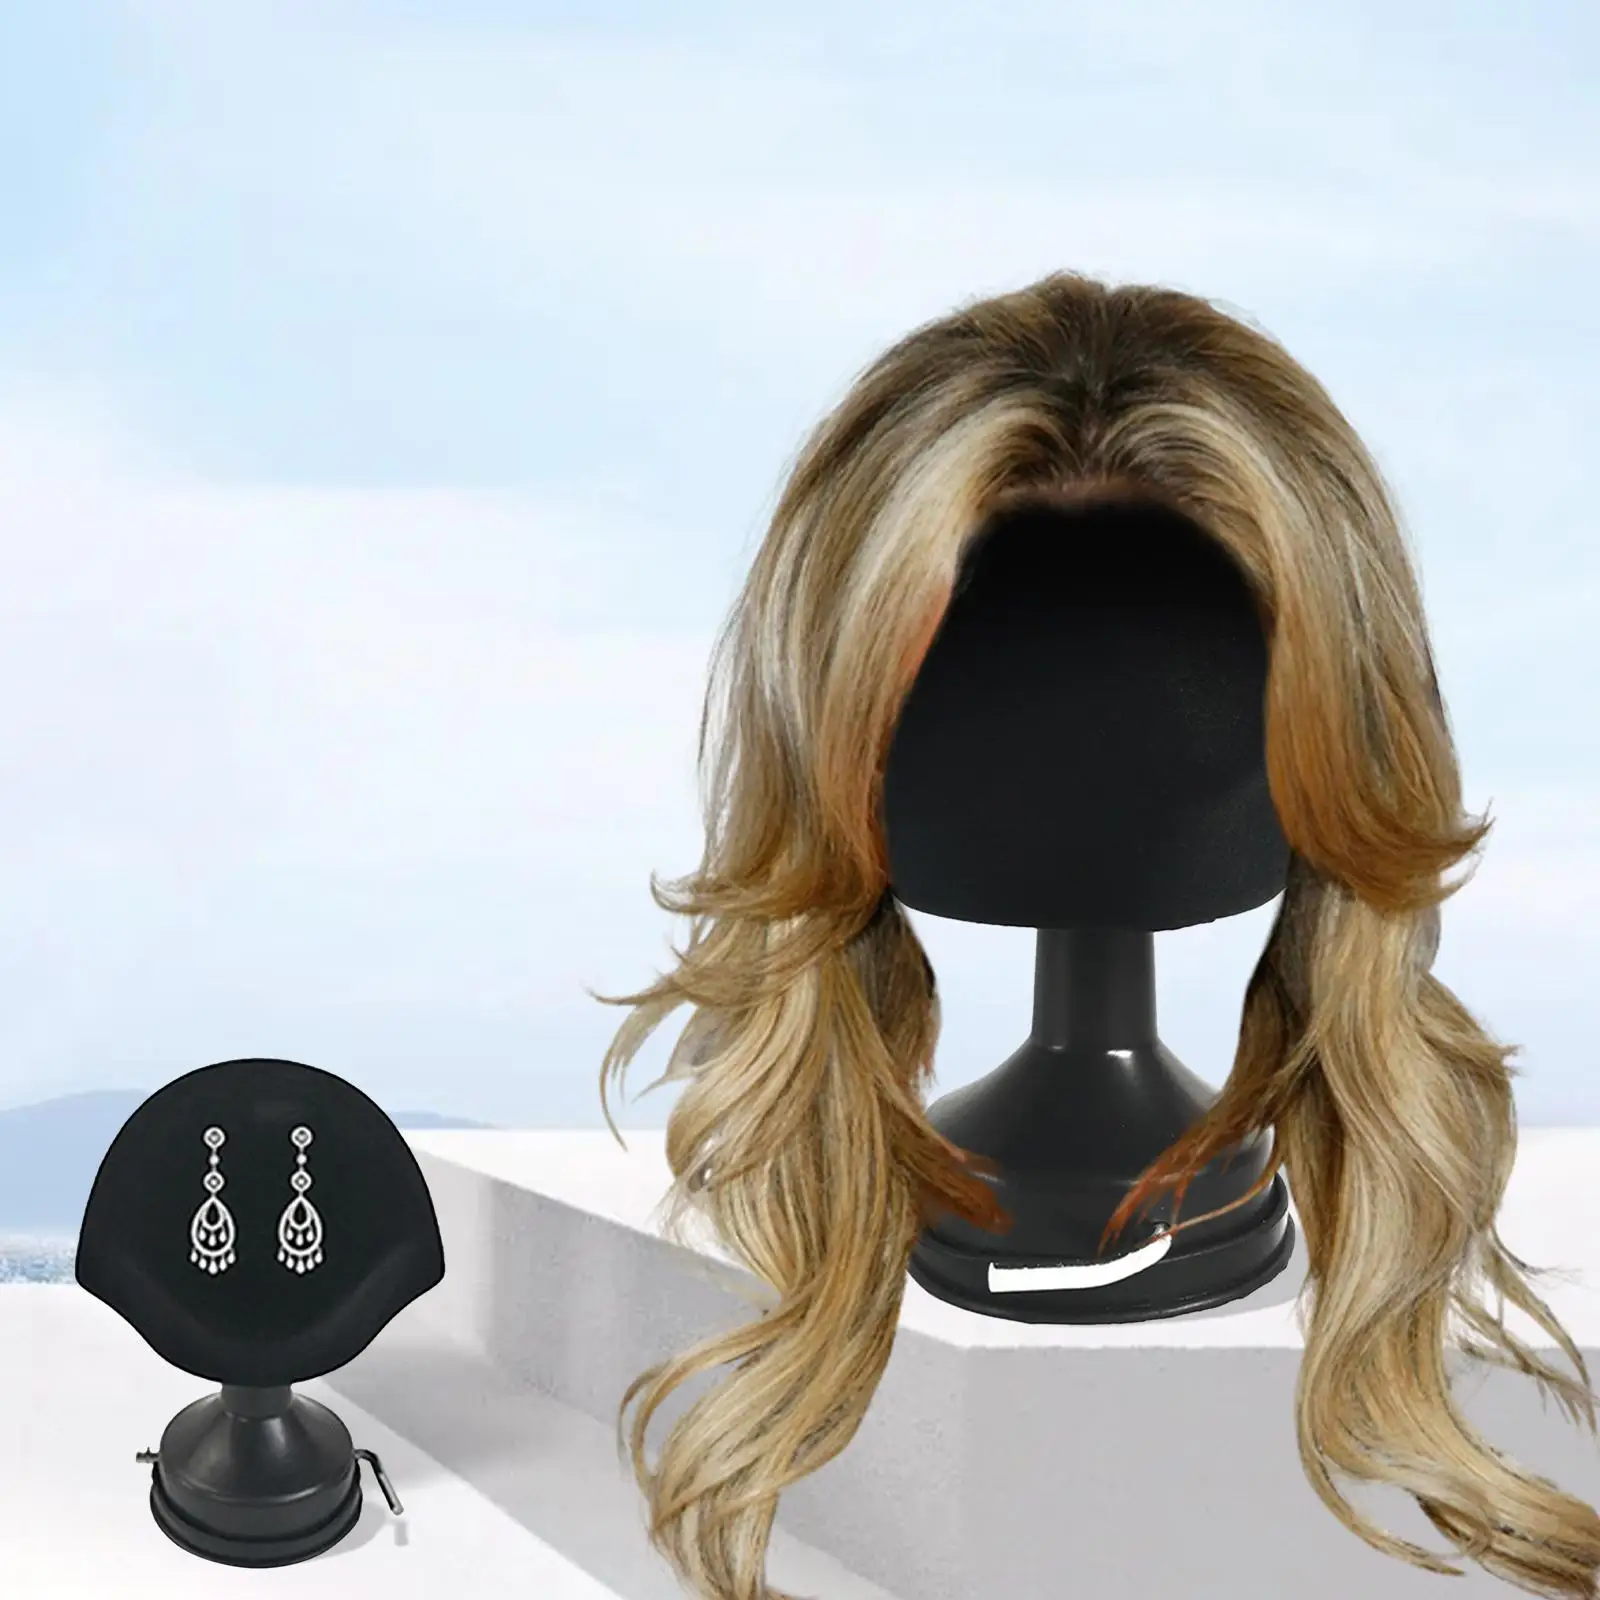 Portable Wig Stand with Sucker Headform Durable Practical Storage Hair Holder Stands for Glasses Earrings Travel Toupee Tool